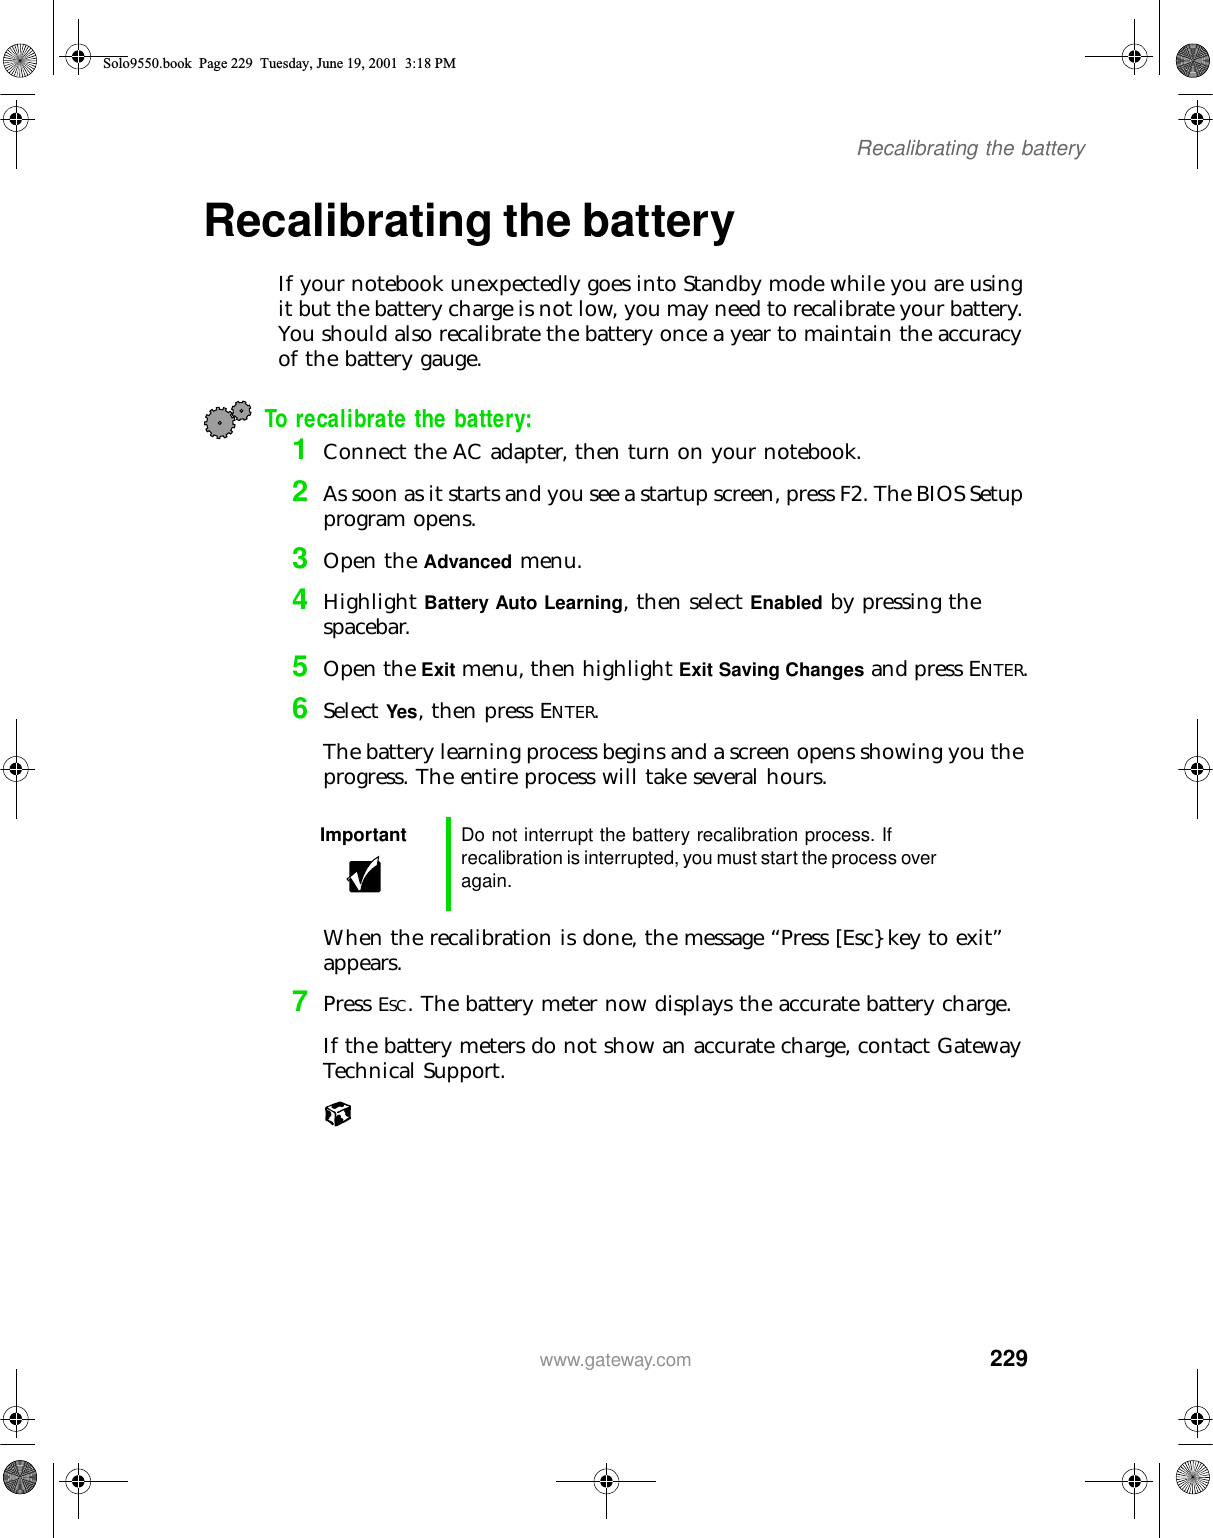 229Recalibrating the batterywww.gateway.comRecalibrating the battery If your notebook unexpectedly goes into Standby mode while you are using it but the battery charge is not low, you may need to recalibrate your battery. You should also recalibrate the battery once a year to maintain the accuracy of the battery gauge.To recalibrate the battery:1Connect the AC adapter, then turn on your notebook.2As soon as it starts and you see a startup screen, press F2. The BIOS Setup program opens.3Open the Advanced menu.4Highlight Battery Auto Learning, then select Enabled by pressing the spacebar.5Open the Exit menu, then highlight Exit Saving Changes and press ENTER.6Select Yes, then press ENTER.The battery learning process begins and a screen opens showing you the progress. The entire process will take several hours.When the recalibration is done, the message “Press [Esc} key to exit” appears.7Press ESC. The battery meter now displays the accurate battery charge.If the battery meters do not show an accurate charge, contact Gateway Technical Support.Important Do not interrupt the battery recalibration process. If recalibration is interrupted, you must start the process over again.Solo9550.book Page 229 Tuesday, June 19, 2001 3:18 PM